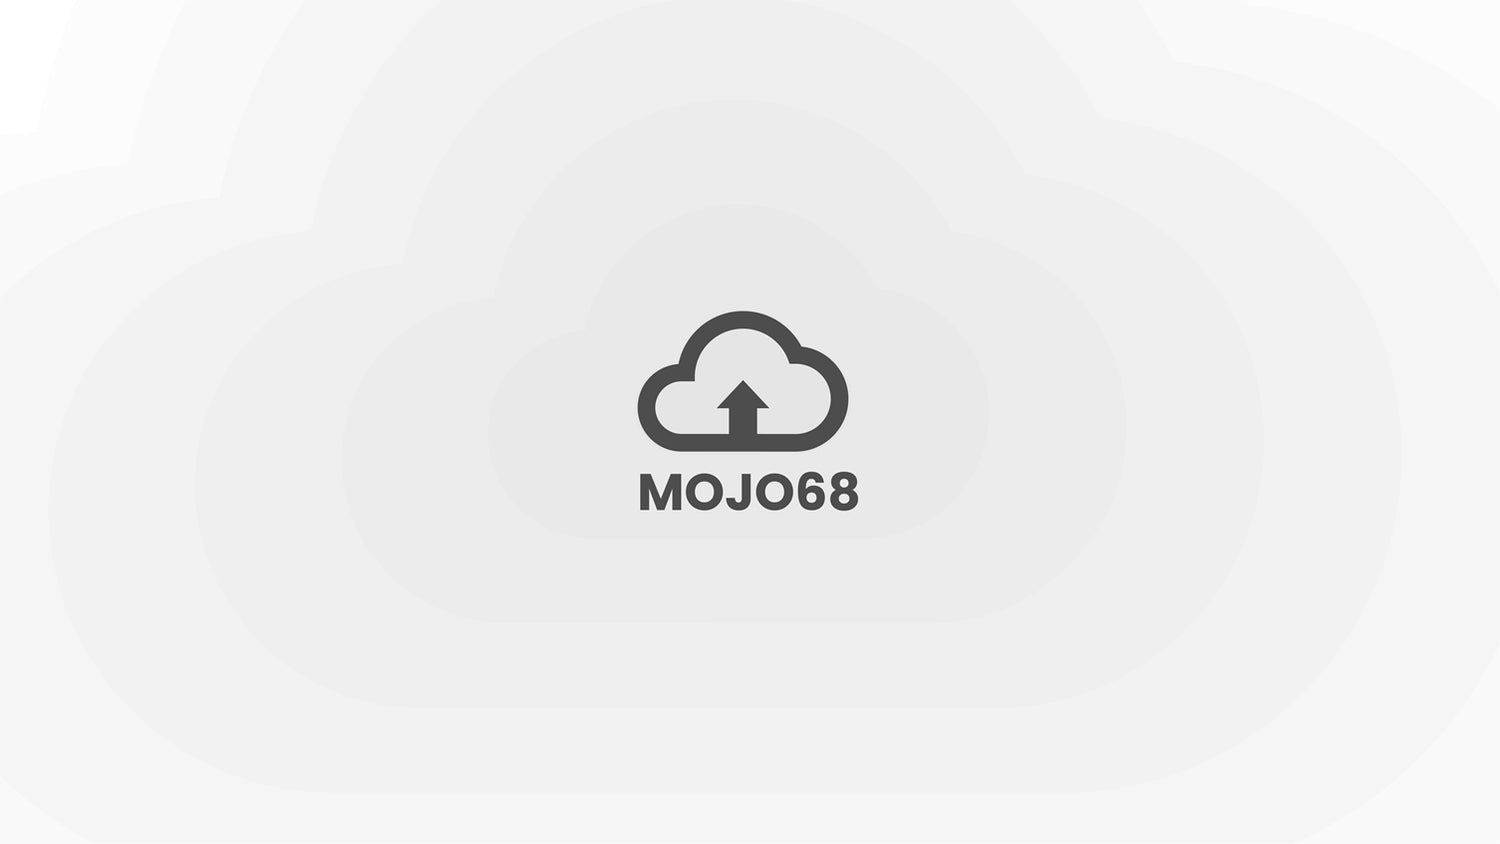 How to upgrade the firmware of Mojo68